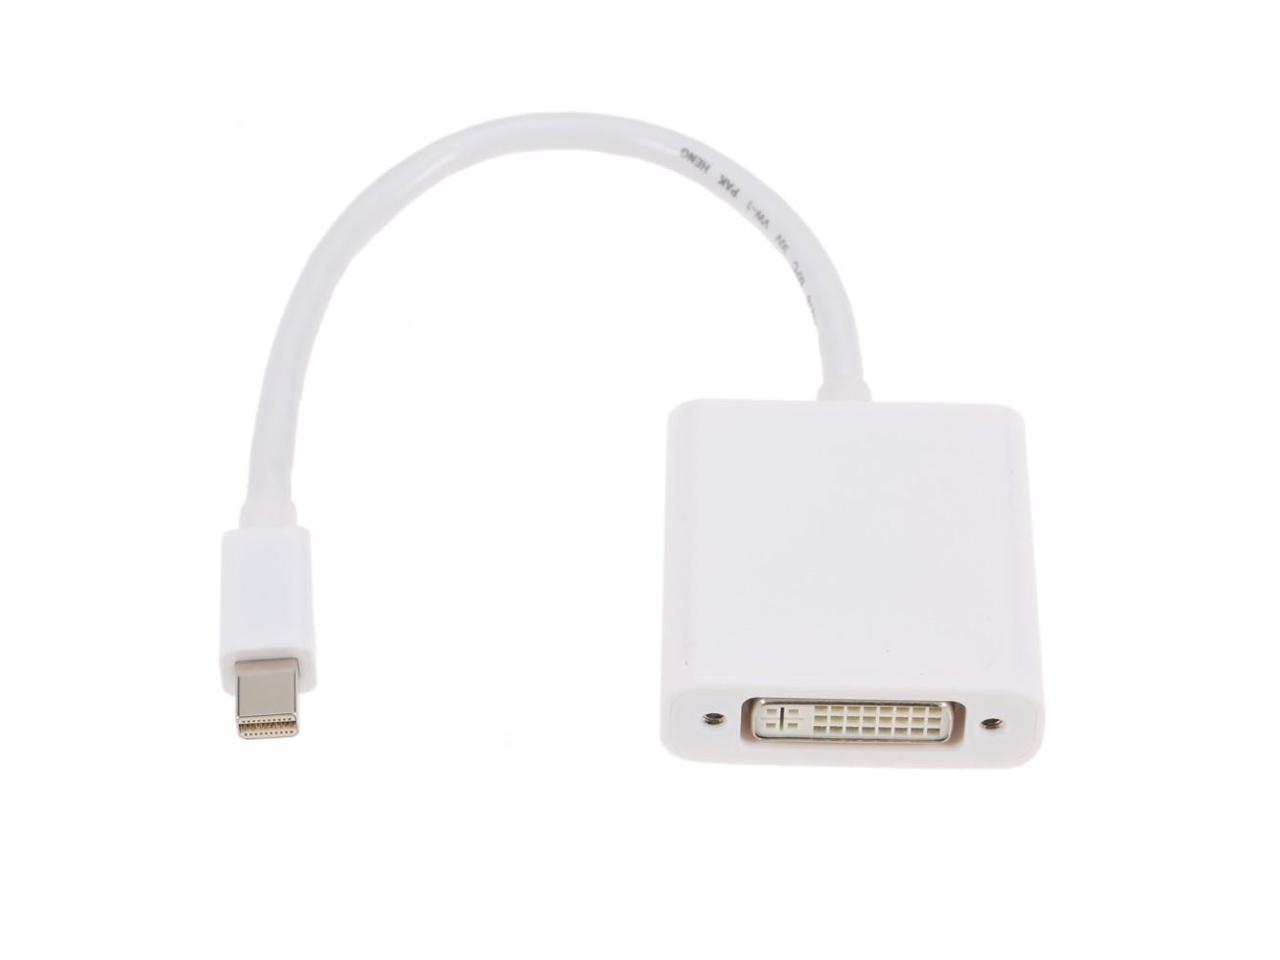 iMac, HDTV, Projector mDP Ultra HD 4Kx2K 3D Thunderbolt 2 CableCreation Mini DisplayPort to DVI Cable Compatible with MacBook Pro 3ft/0.9M Black to DVI Cord Mini DP 